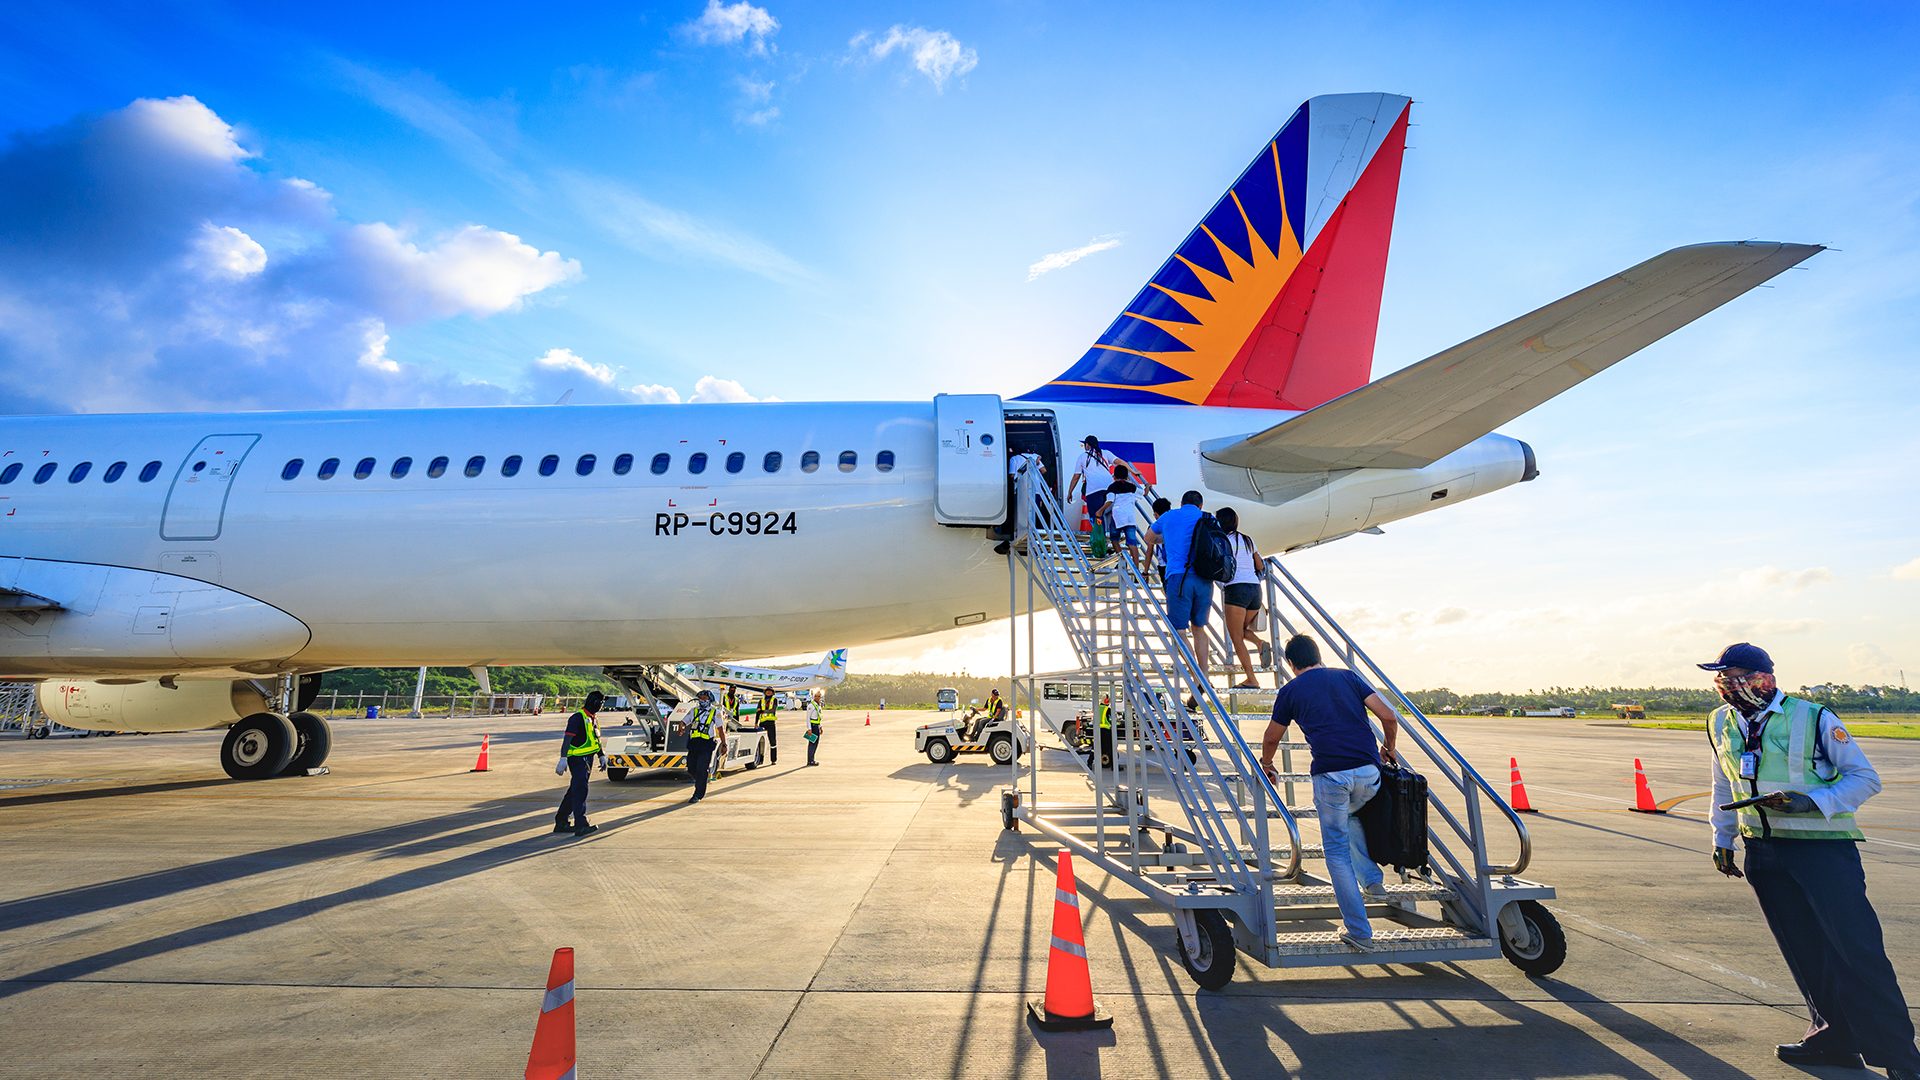 PAL loses P16.6 billion, patches up bleeding by reducing workers and planes